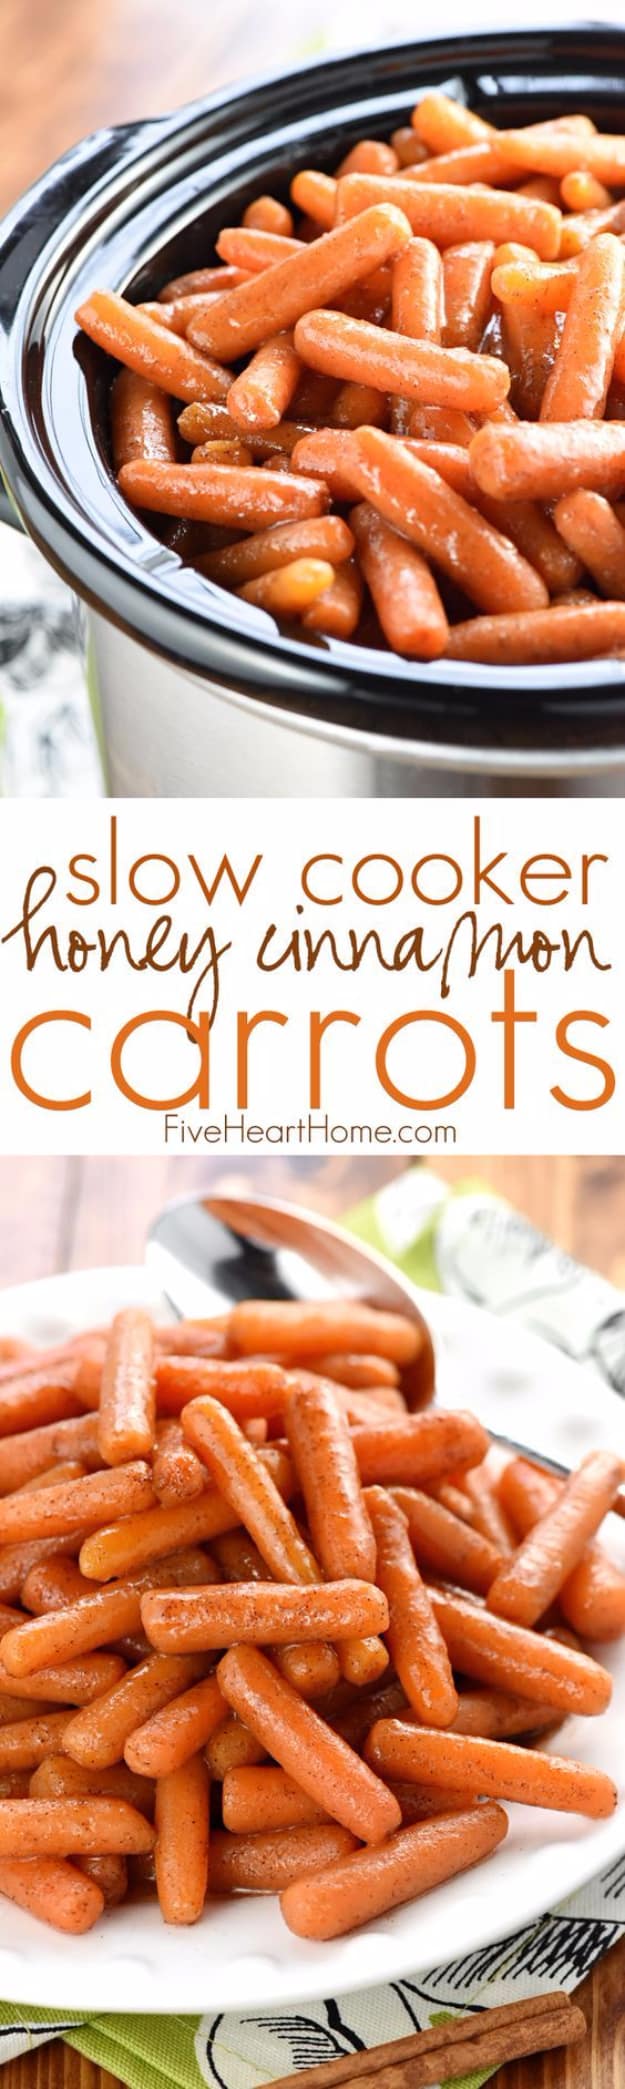 Thanksgiving Recipes You Can Make In A Crockpot or Slow Cooker - Slow Cooker Honey Cinnamon Carrots - Soups, Stews, Desserts, Dips, Sides and Vegetable Recipe Ideas for Your Crock Pot #thanksgiving #recipes